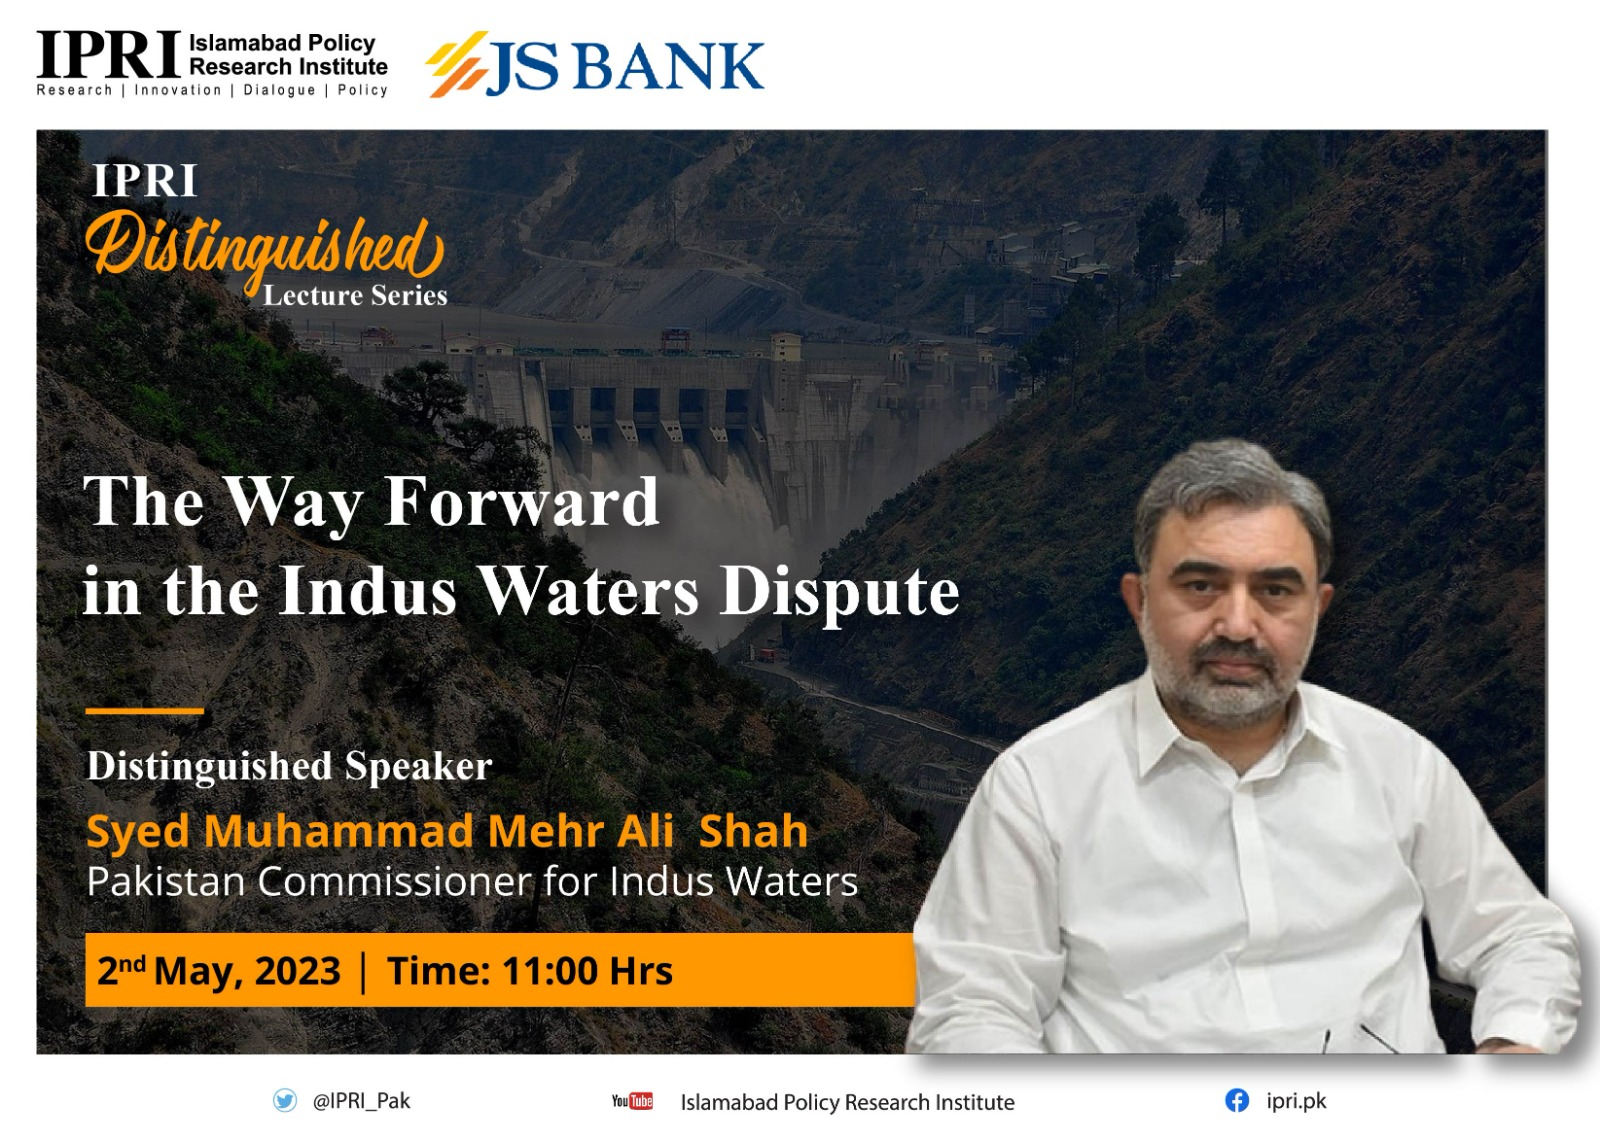 The Way Forward in the Indus Water Dispute